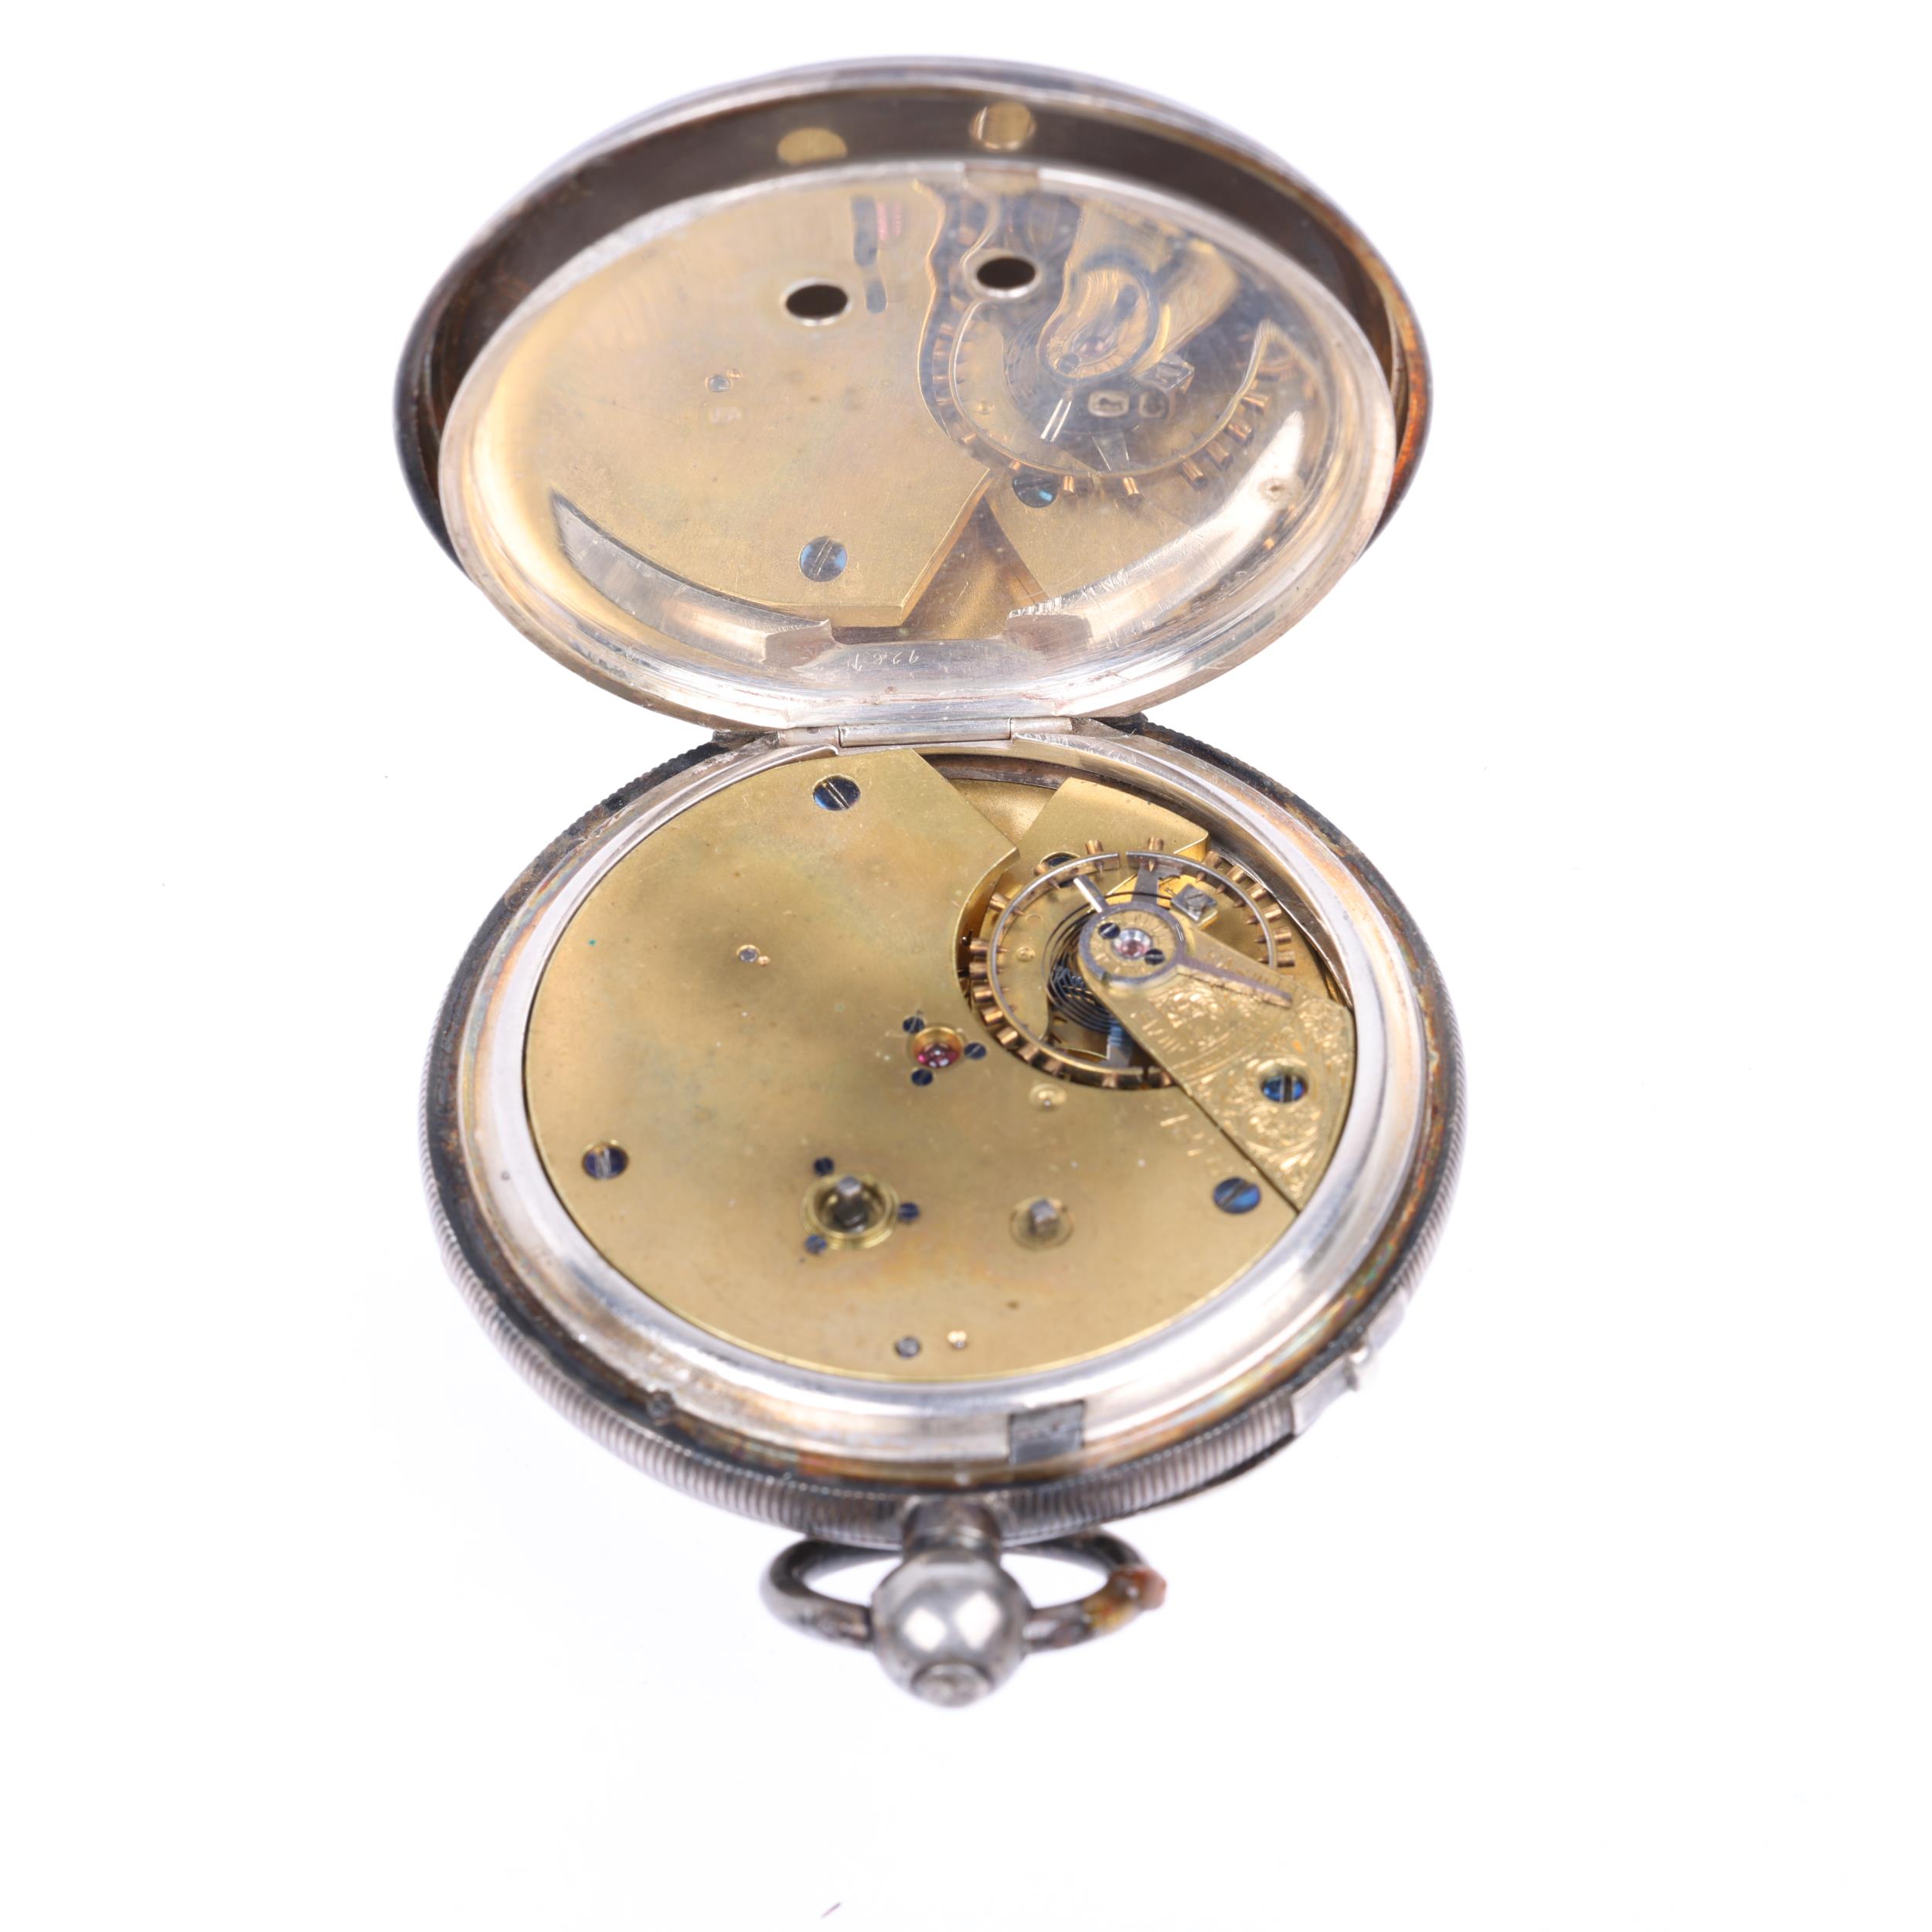 A 19th century silver-cased open-face key-wind chronograph pocket watch, white enamel dial with - Image 5 of 5